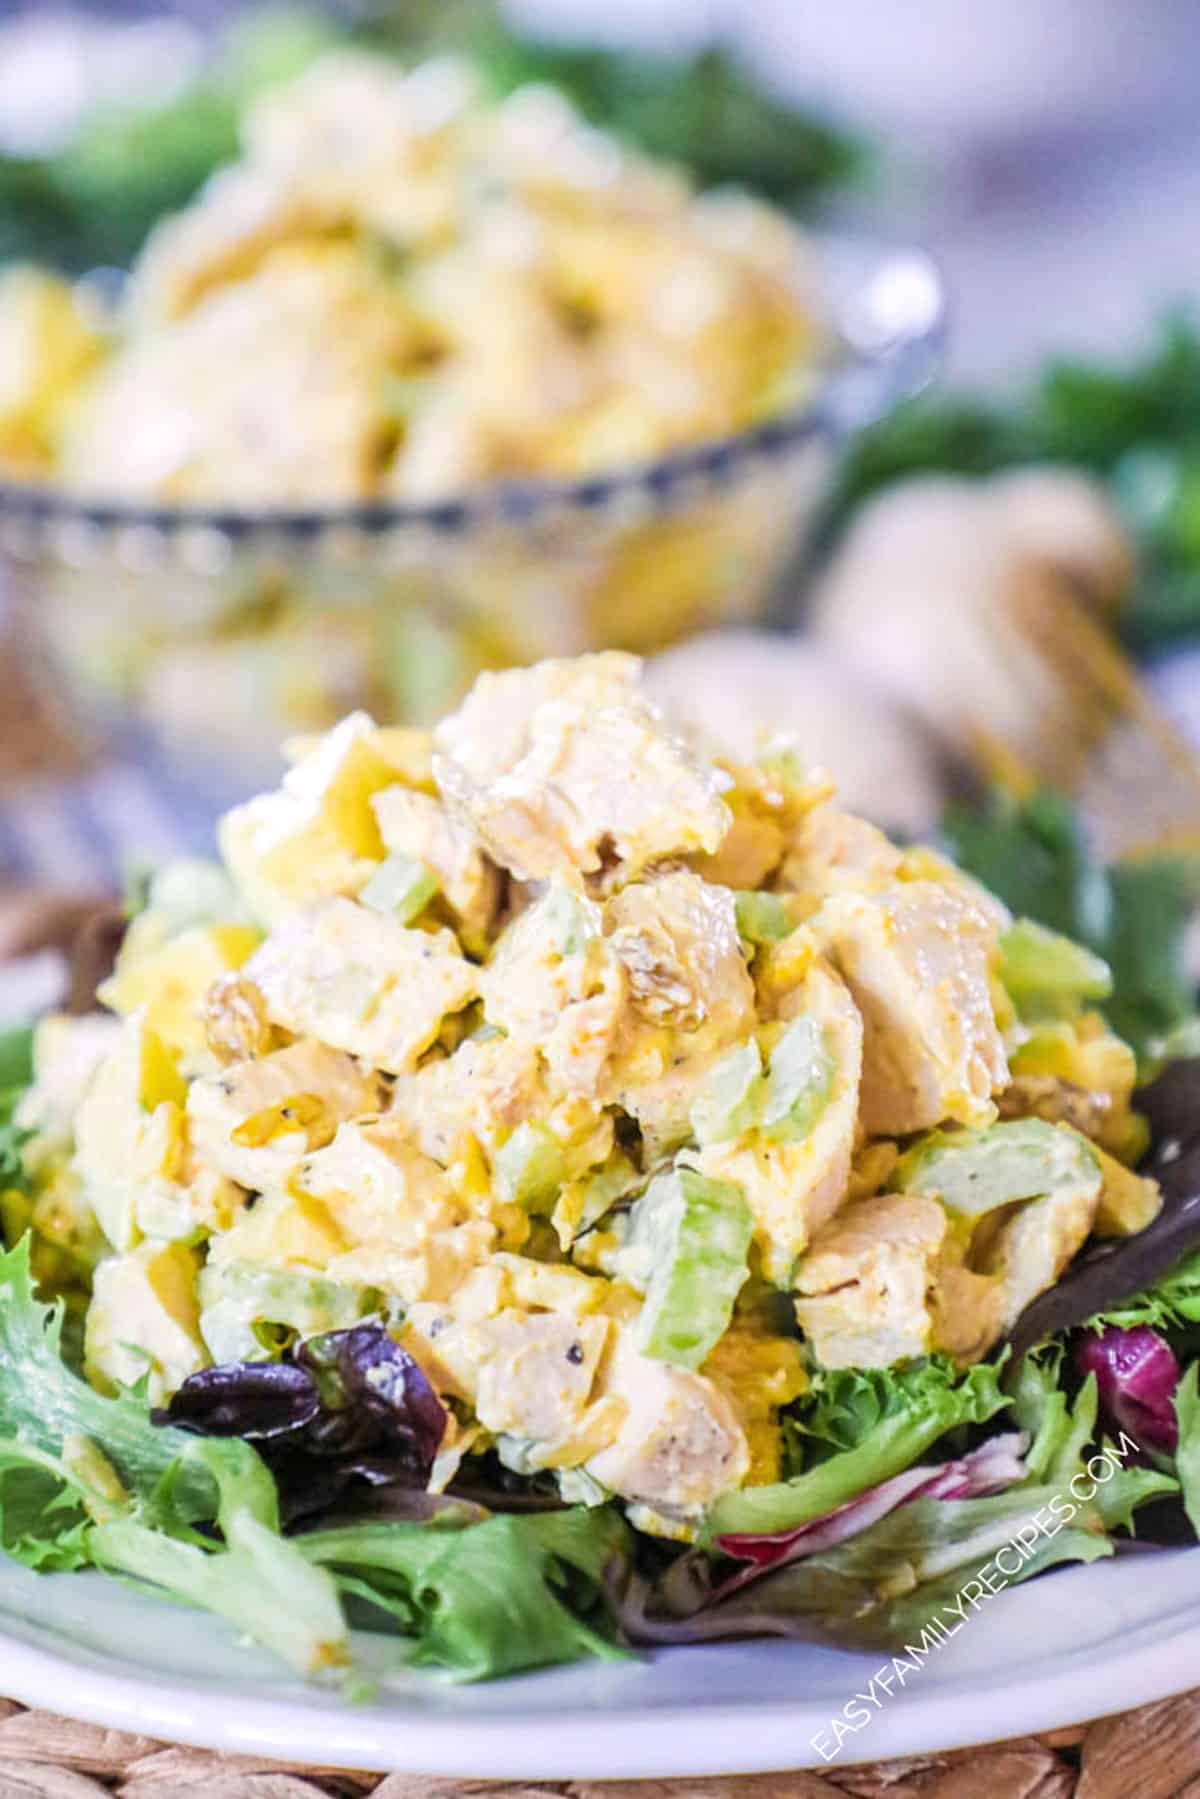 Curry chicken salad served on top of salad greens for lunch.